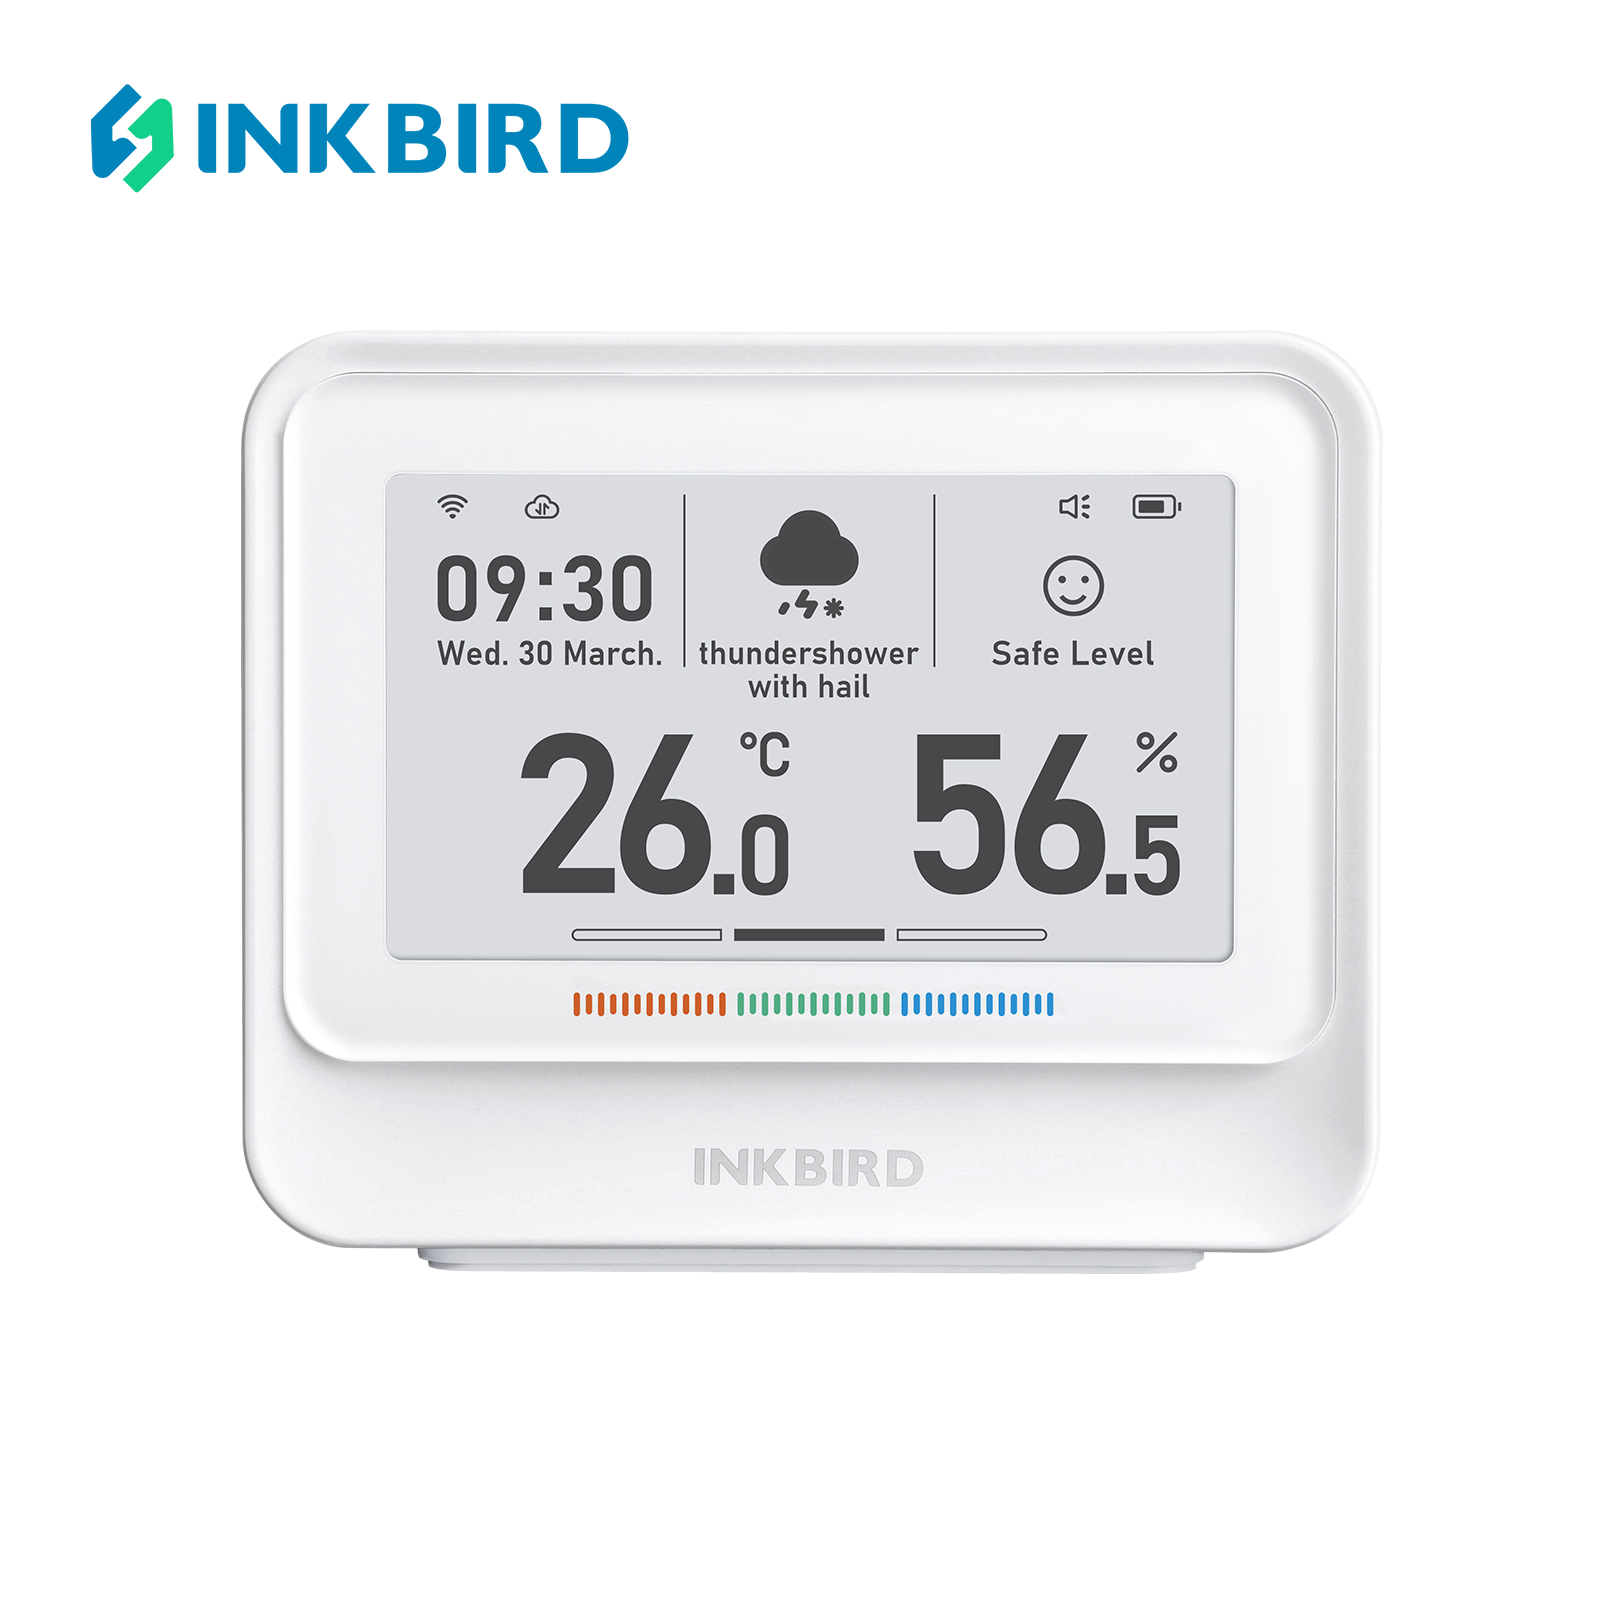 INKBIRD WiFi Thermometer Hygrometer, Temperature and Humidity Sensor with  Weather Station, 8-in-1 IBS-TH5 with Electronic Ink Display, 2 Years Free